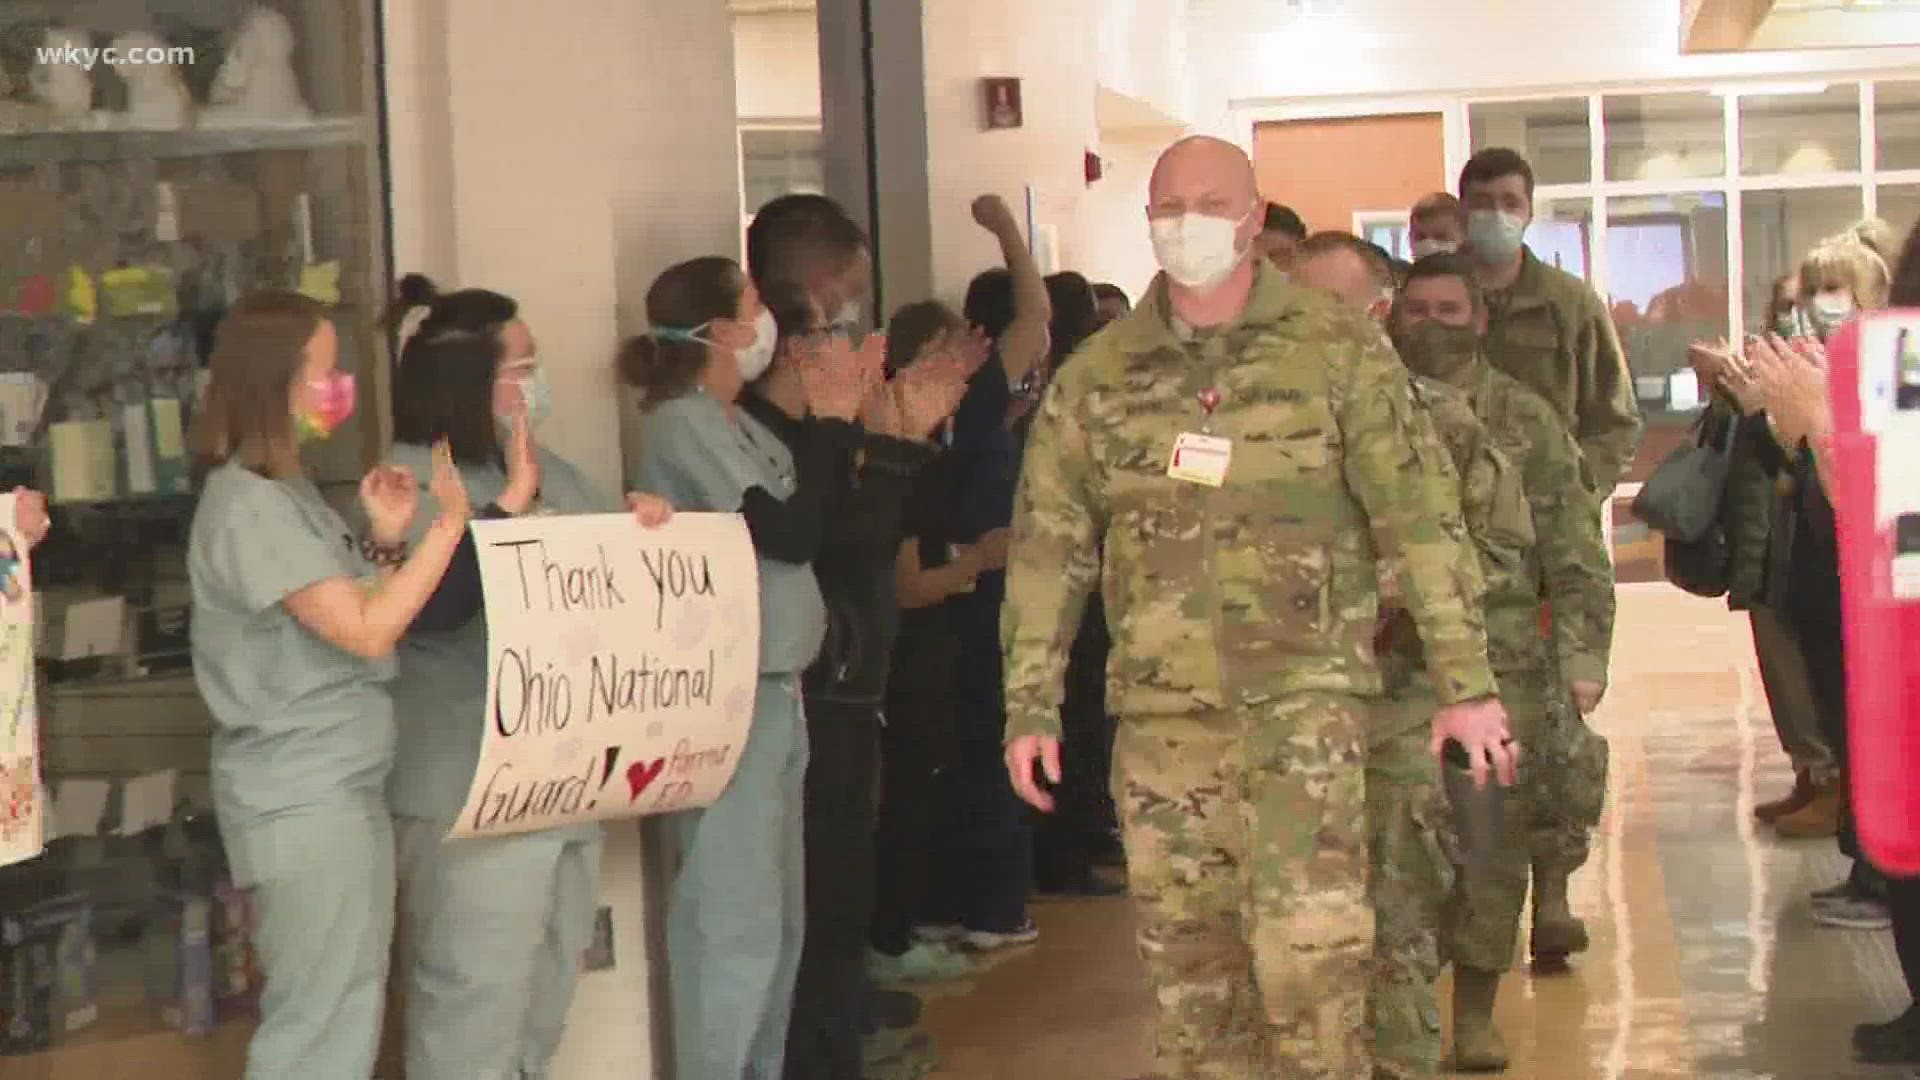 Cheers and applause rang out Thursday afternoon at UH Parma Medical Center. Caregivers showed appreciation for the help they received from the Ohio National Guard.